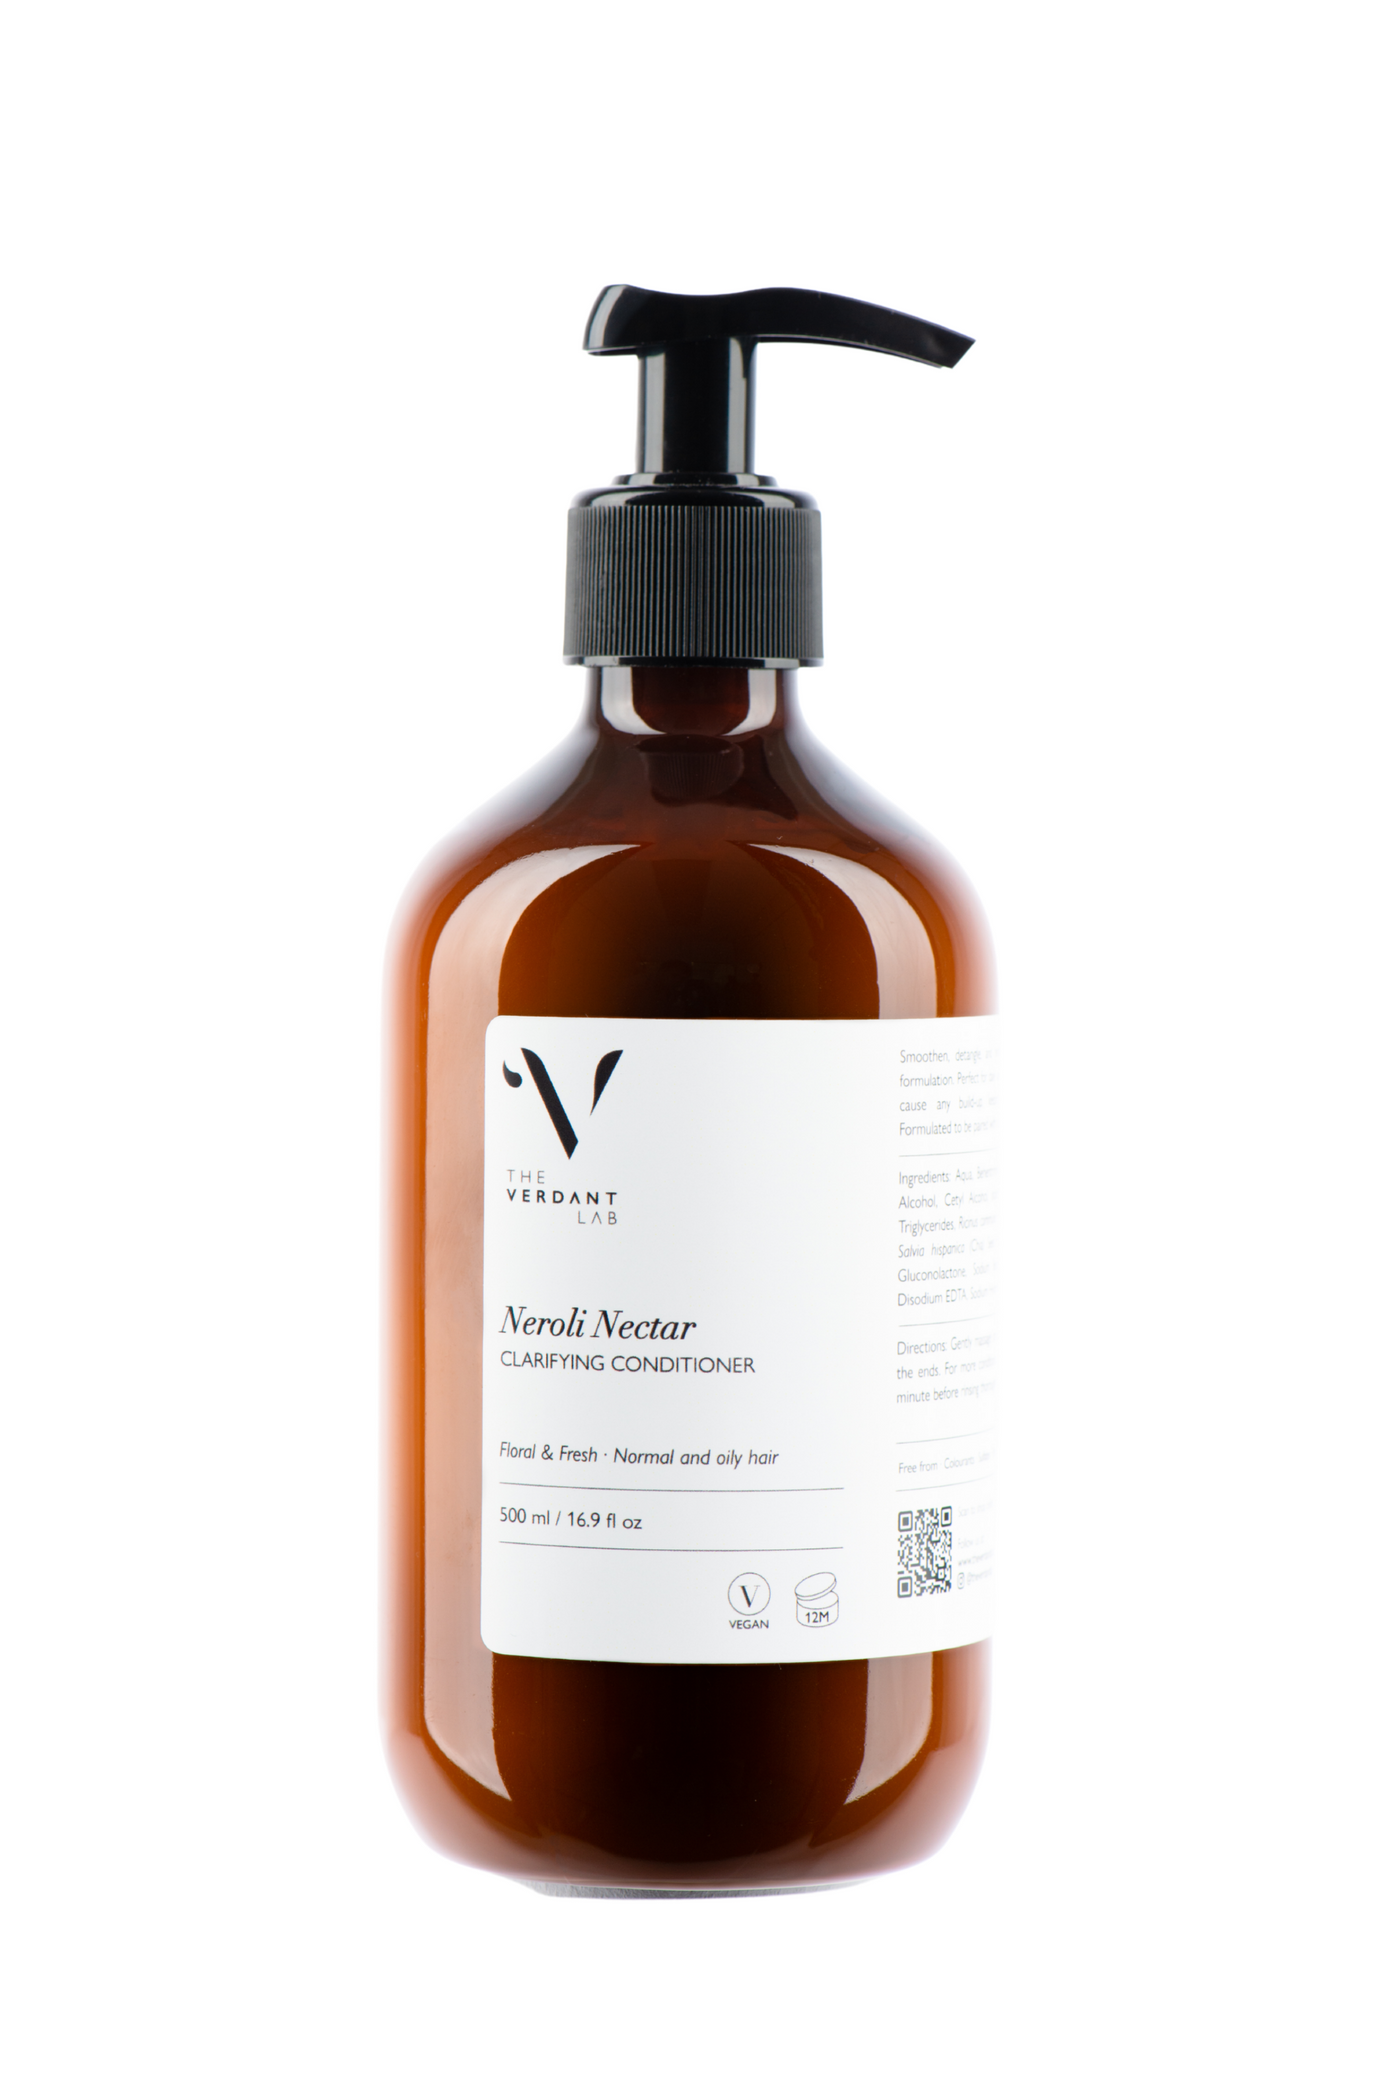 The Verdant Lab Clarifying Conditioner in Neroli Nectar, available on ZERRIN